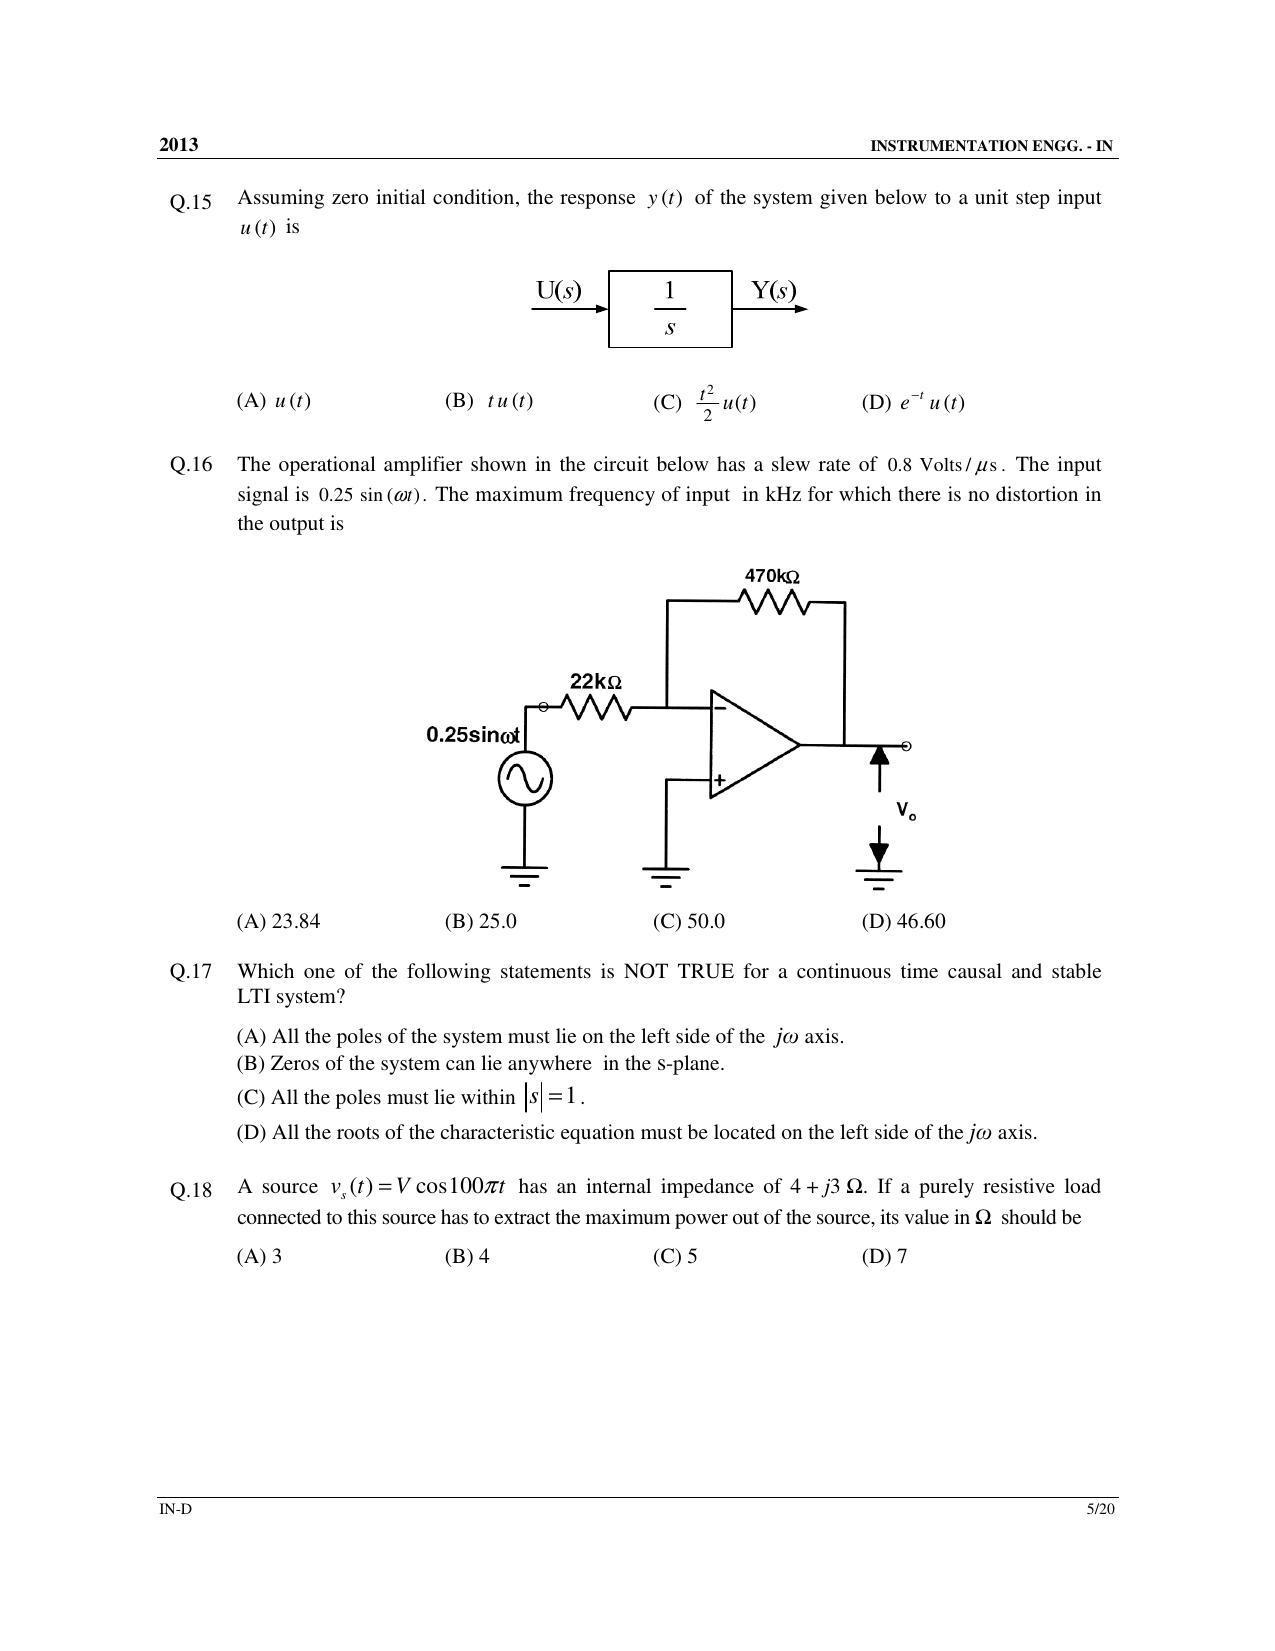 GATE 2013 Instrumentation Engineering (IN) Question Paper with Answer Key - Page 57